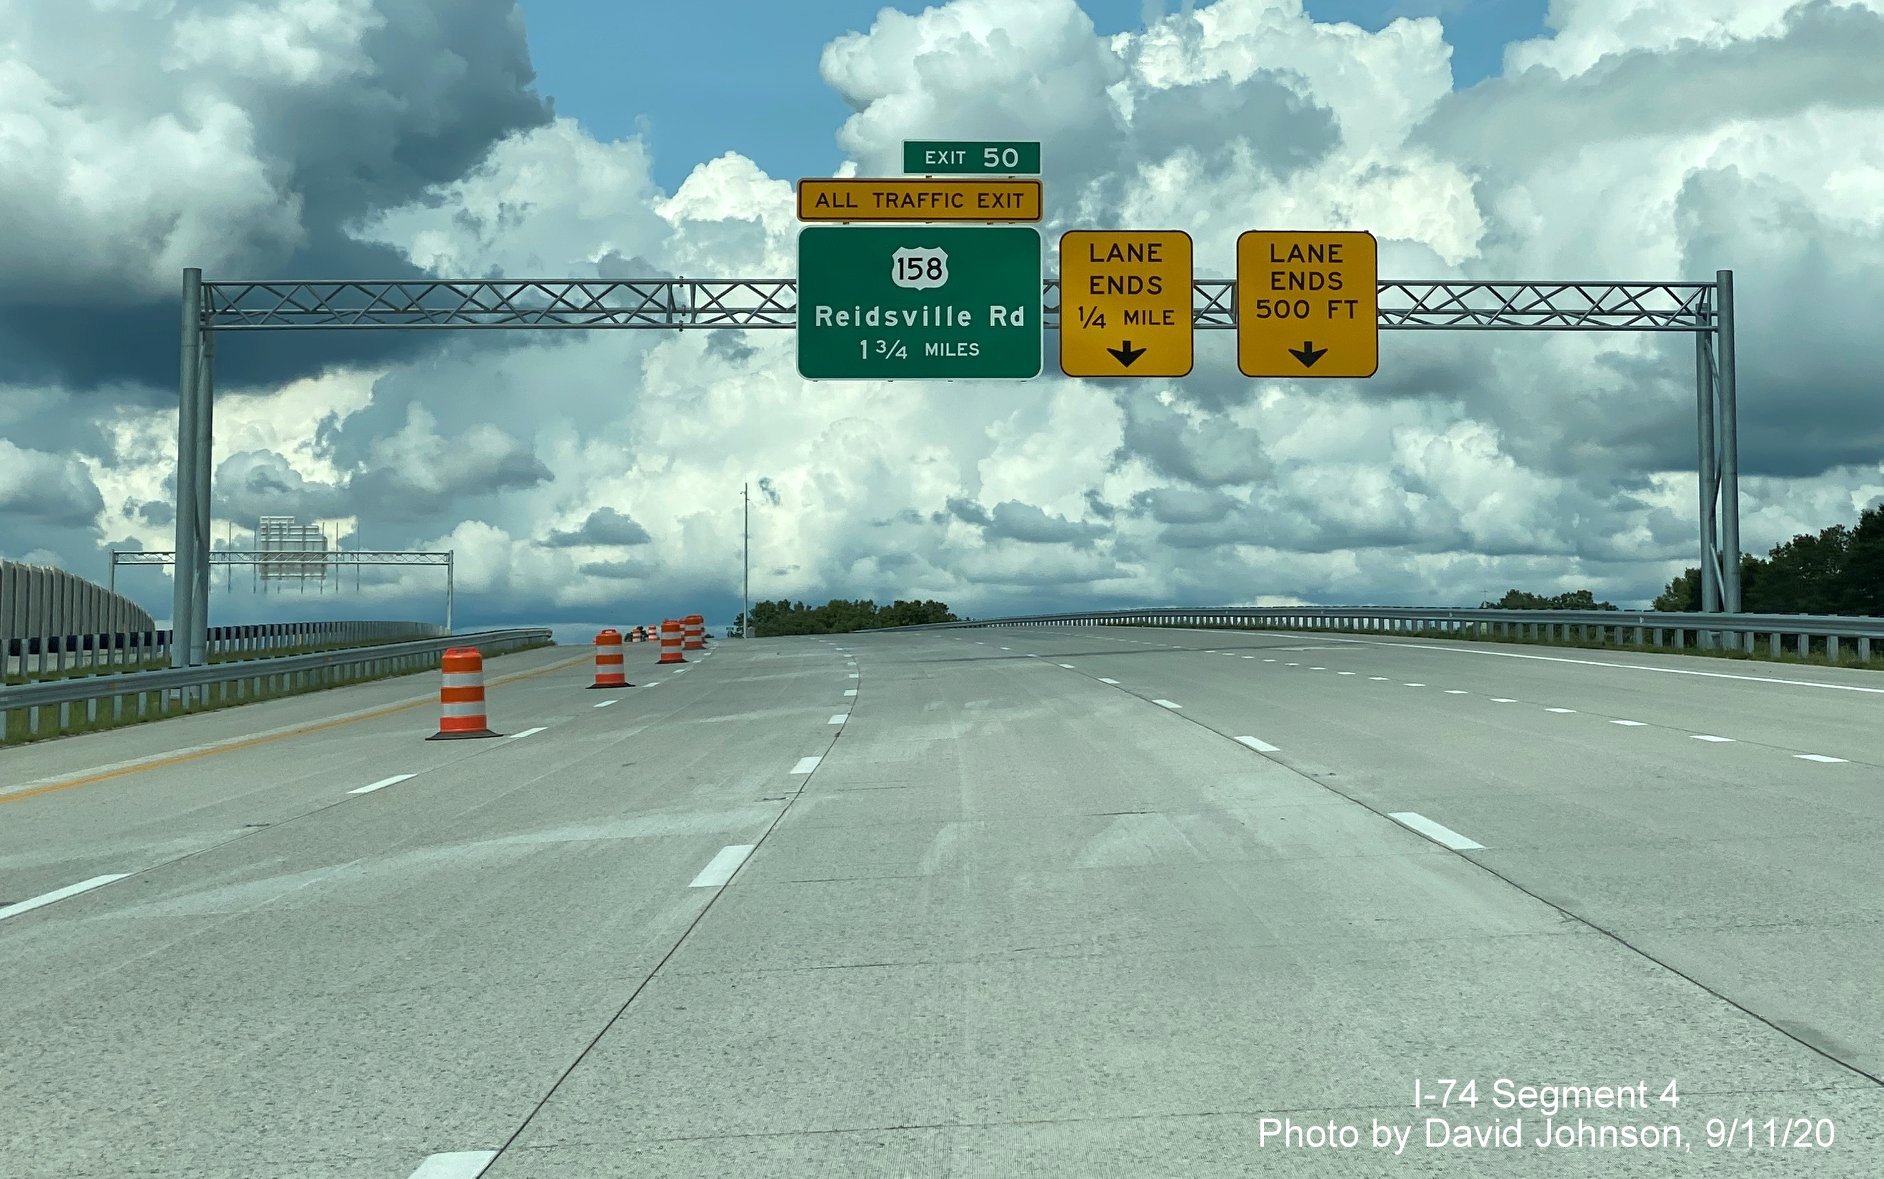 Image of first overhead sign gantry with 1 3/4 mile advance sign for US 158 on NC 74 (Future I-74) West Winston Salem Northern Beltway, by David Johnson September 2020